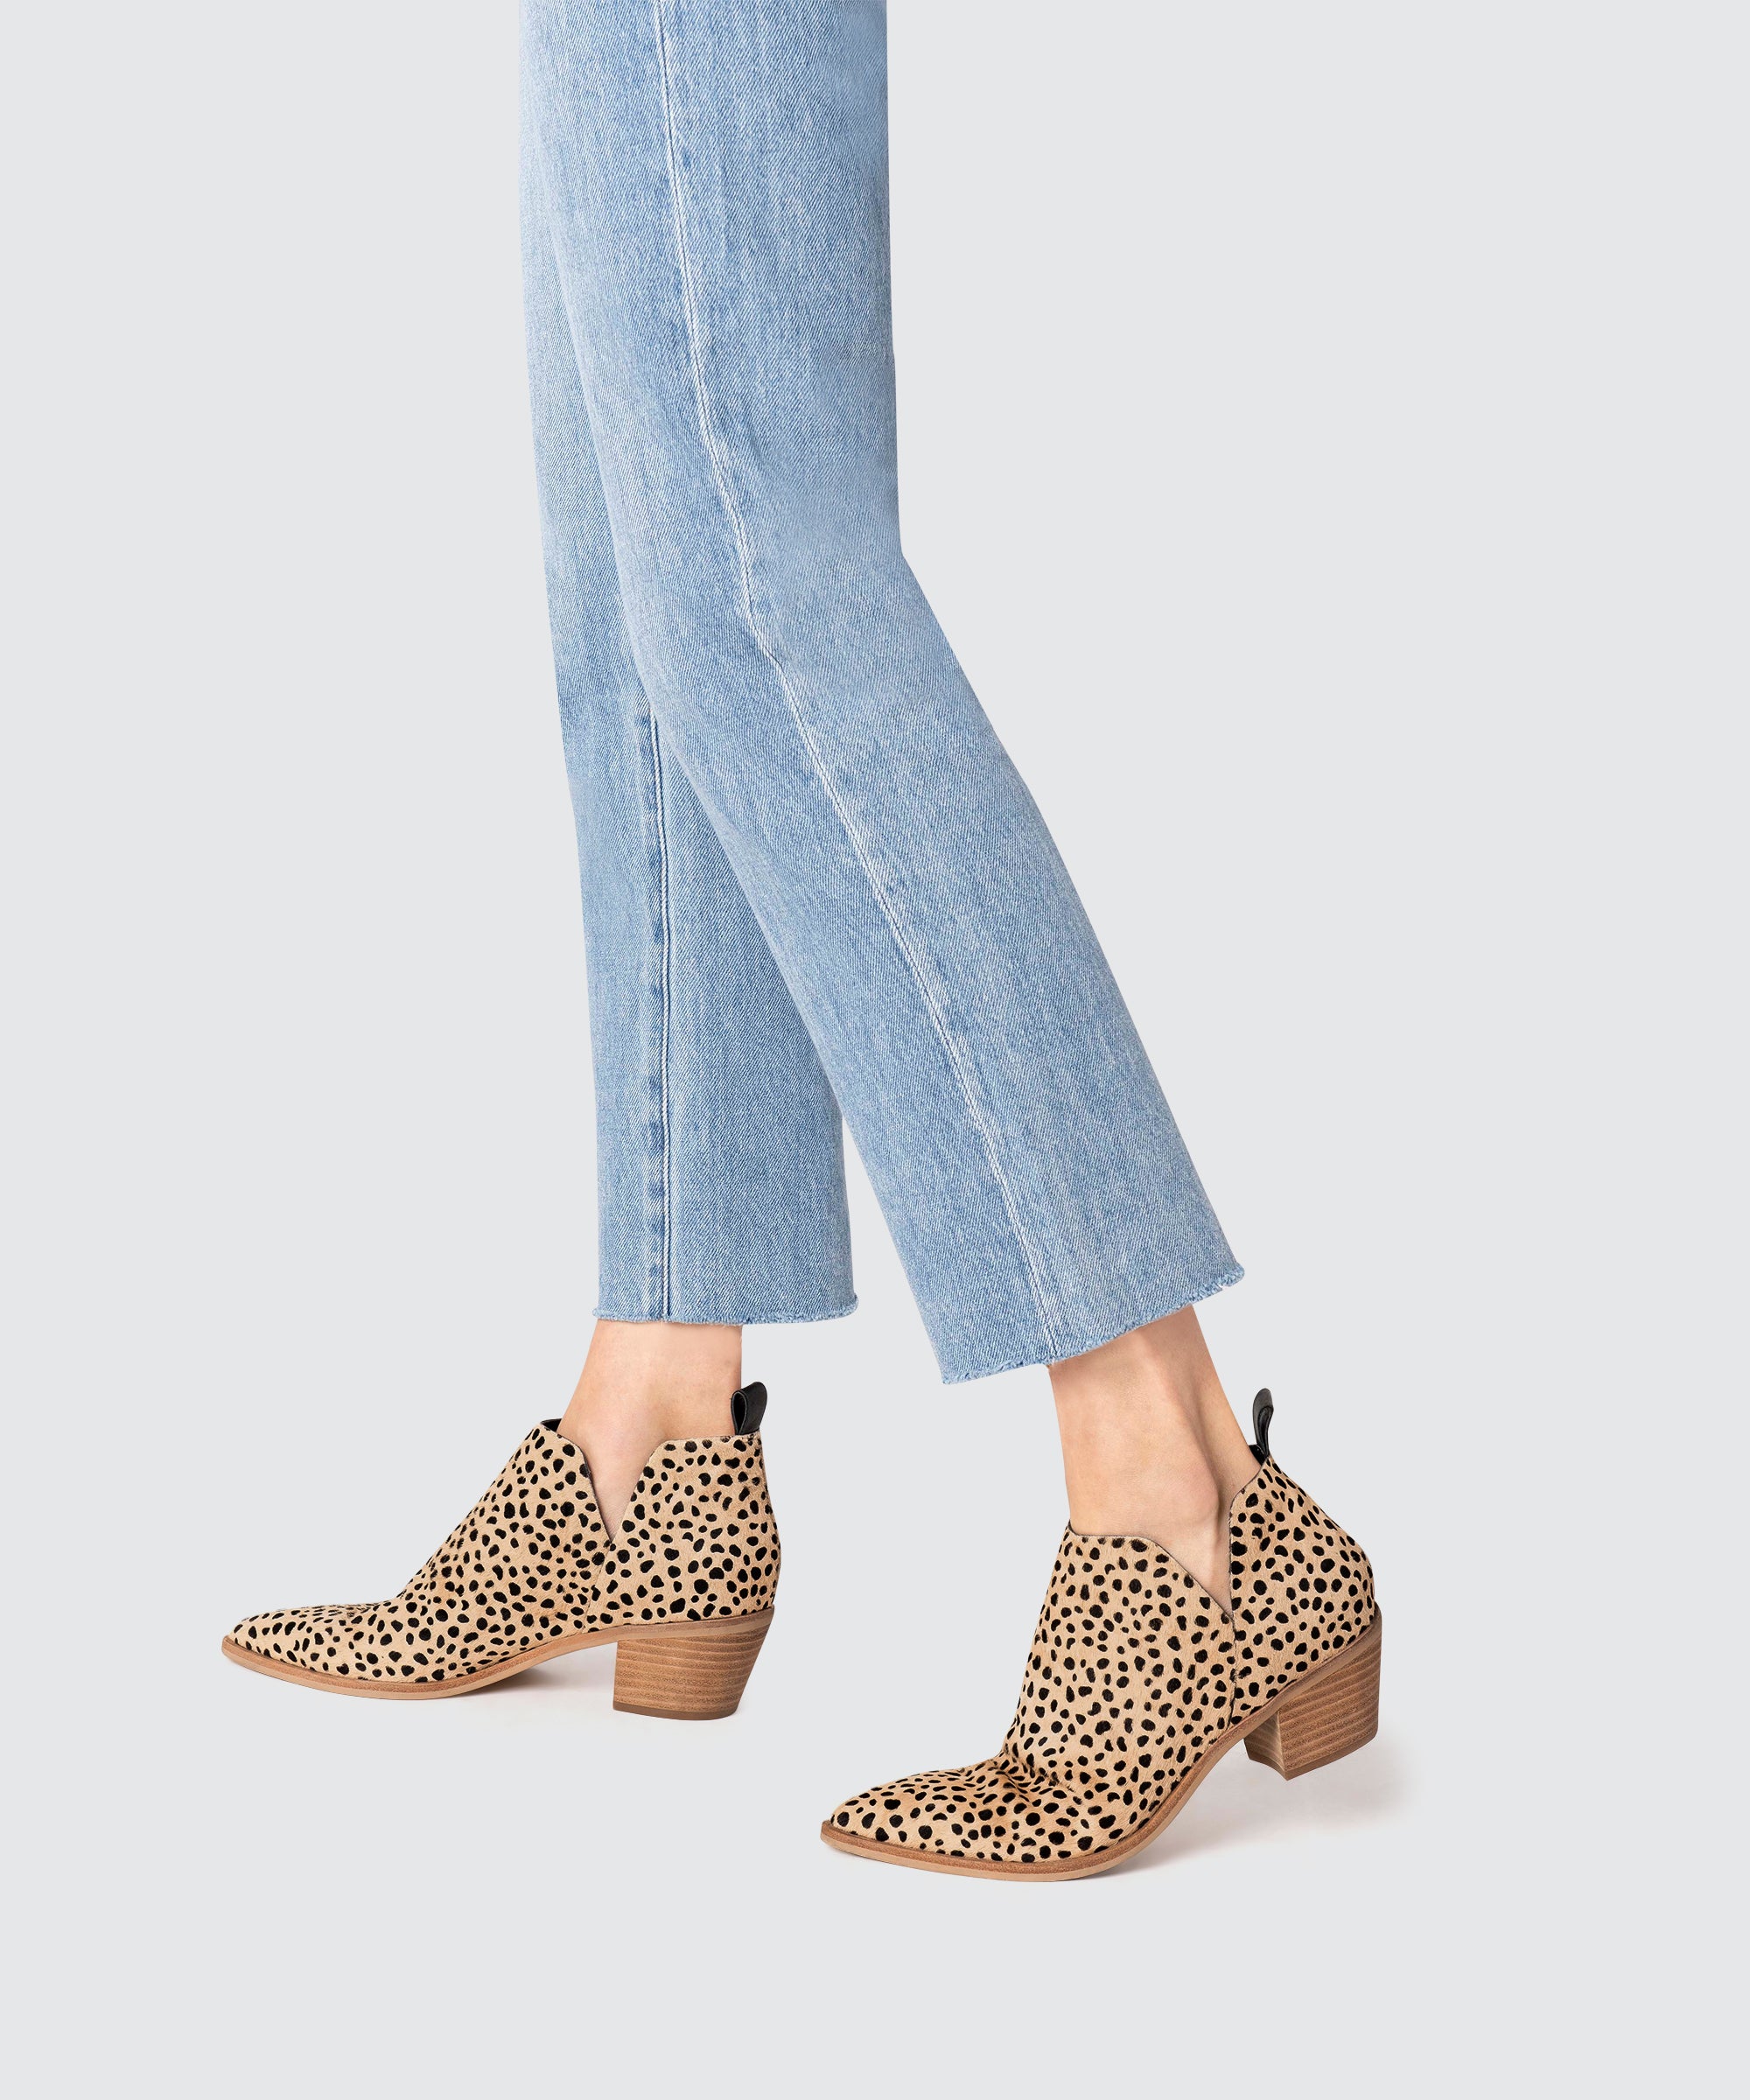 SONNI BOOTIES IN LEOPARD – Dolce Vita